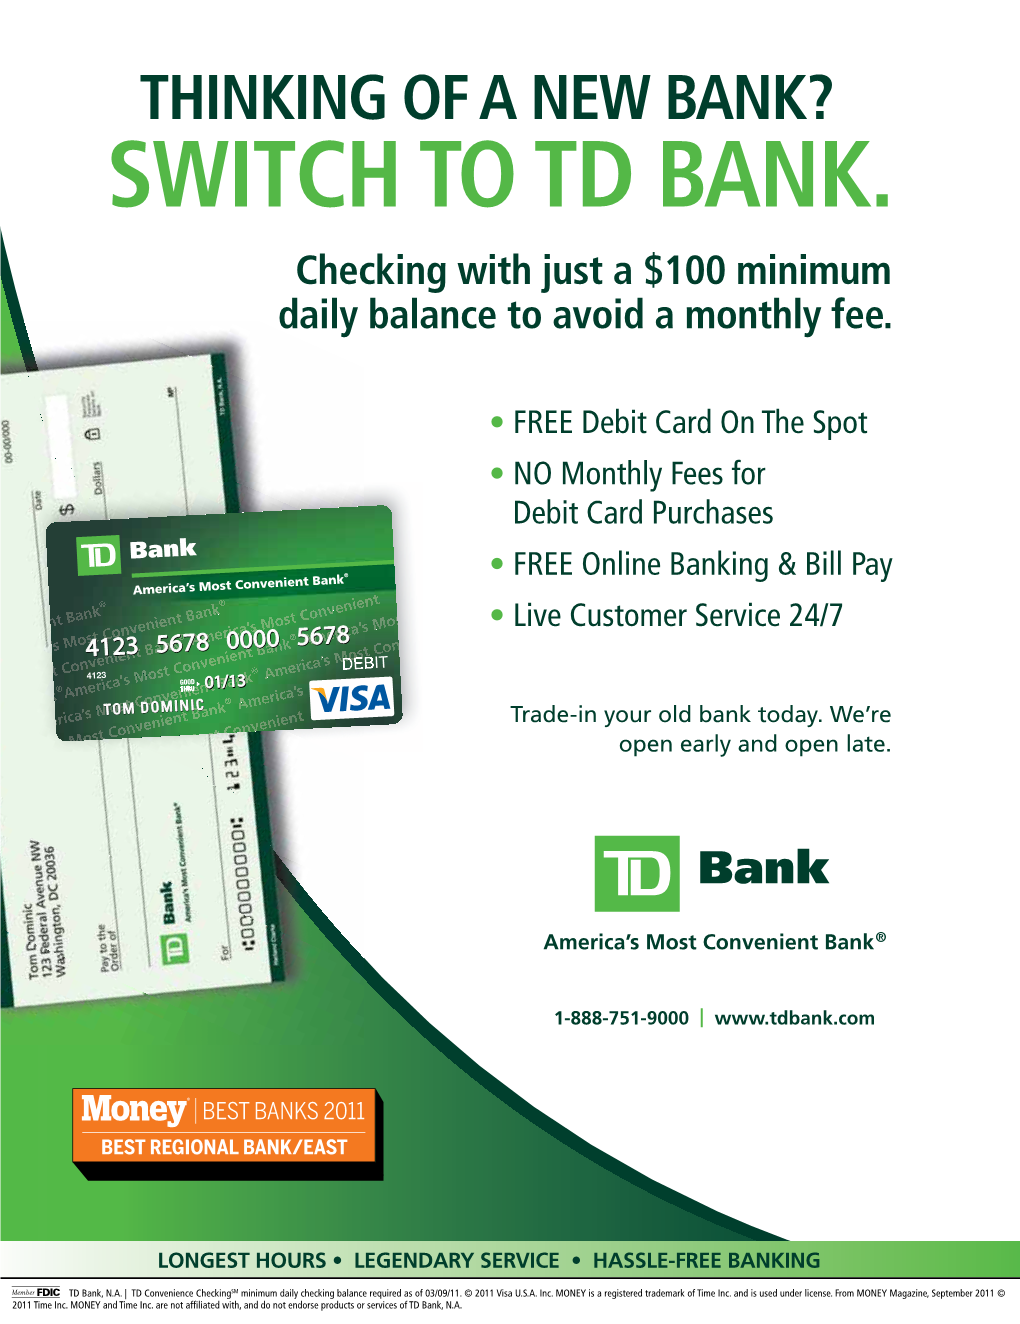 SWITCH to TD BANK. Checking with Just a $100 Minimum Daily Balance to Avoid a Monthly Fee